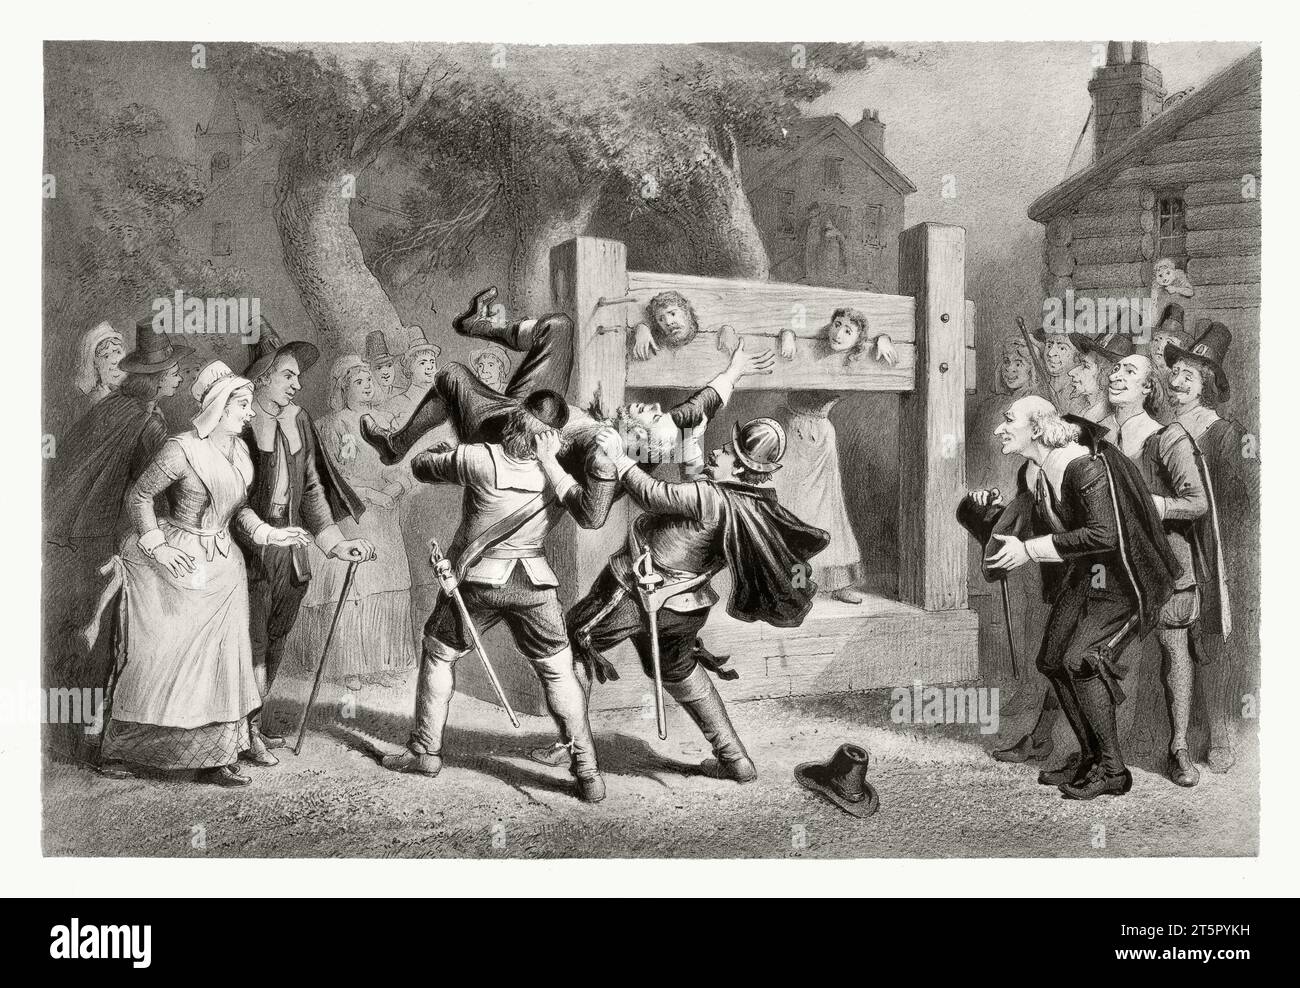 People in colonial attire put some unfortunate individuals in the pillory. An extremely detailed ancient engraving published in 1892. Unknown author Stock Photo